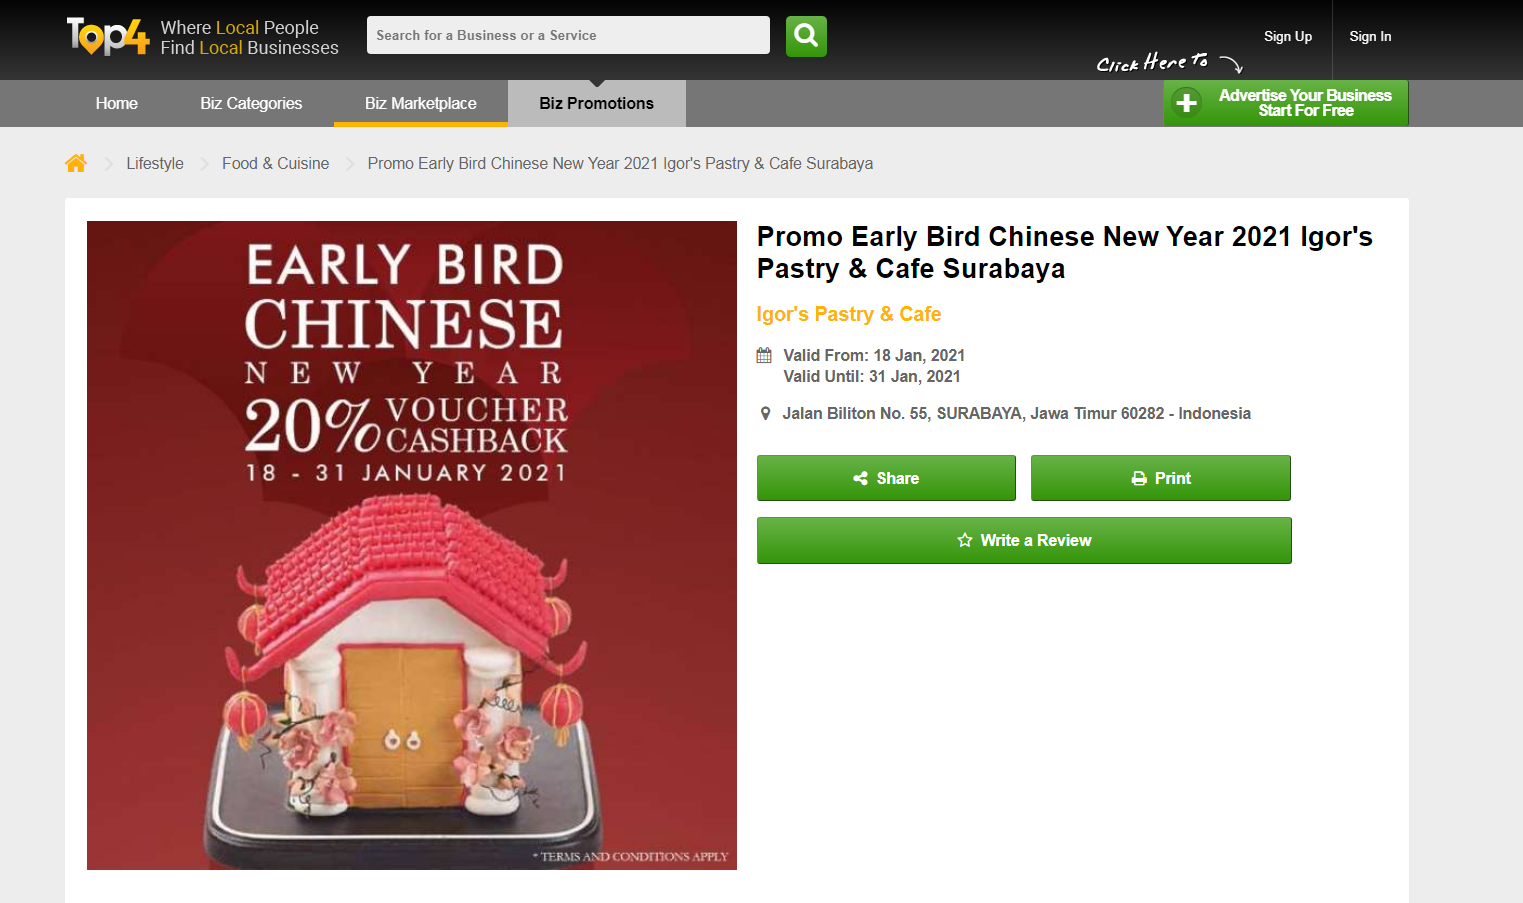 Early Bird Chinese New Year Promotion - Igor's Pastry & Cafe - Top4 Marketing